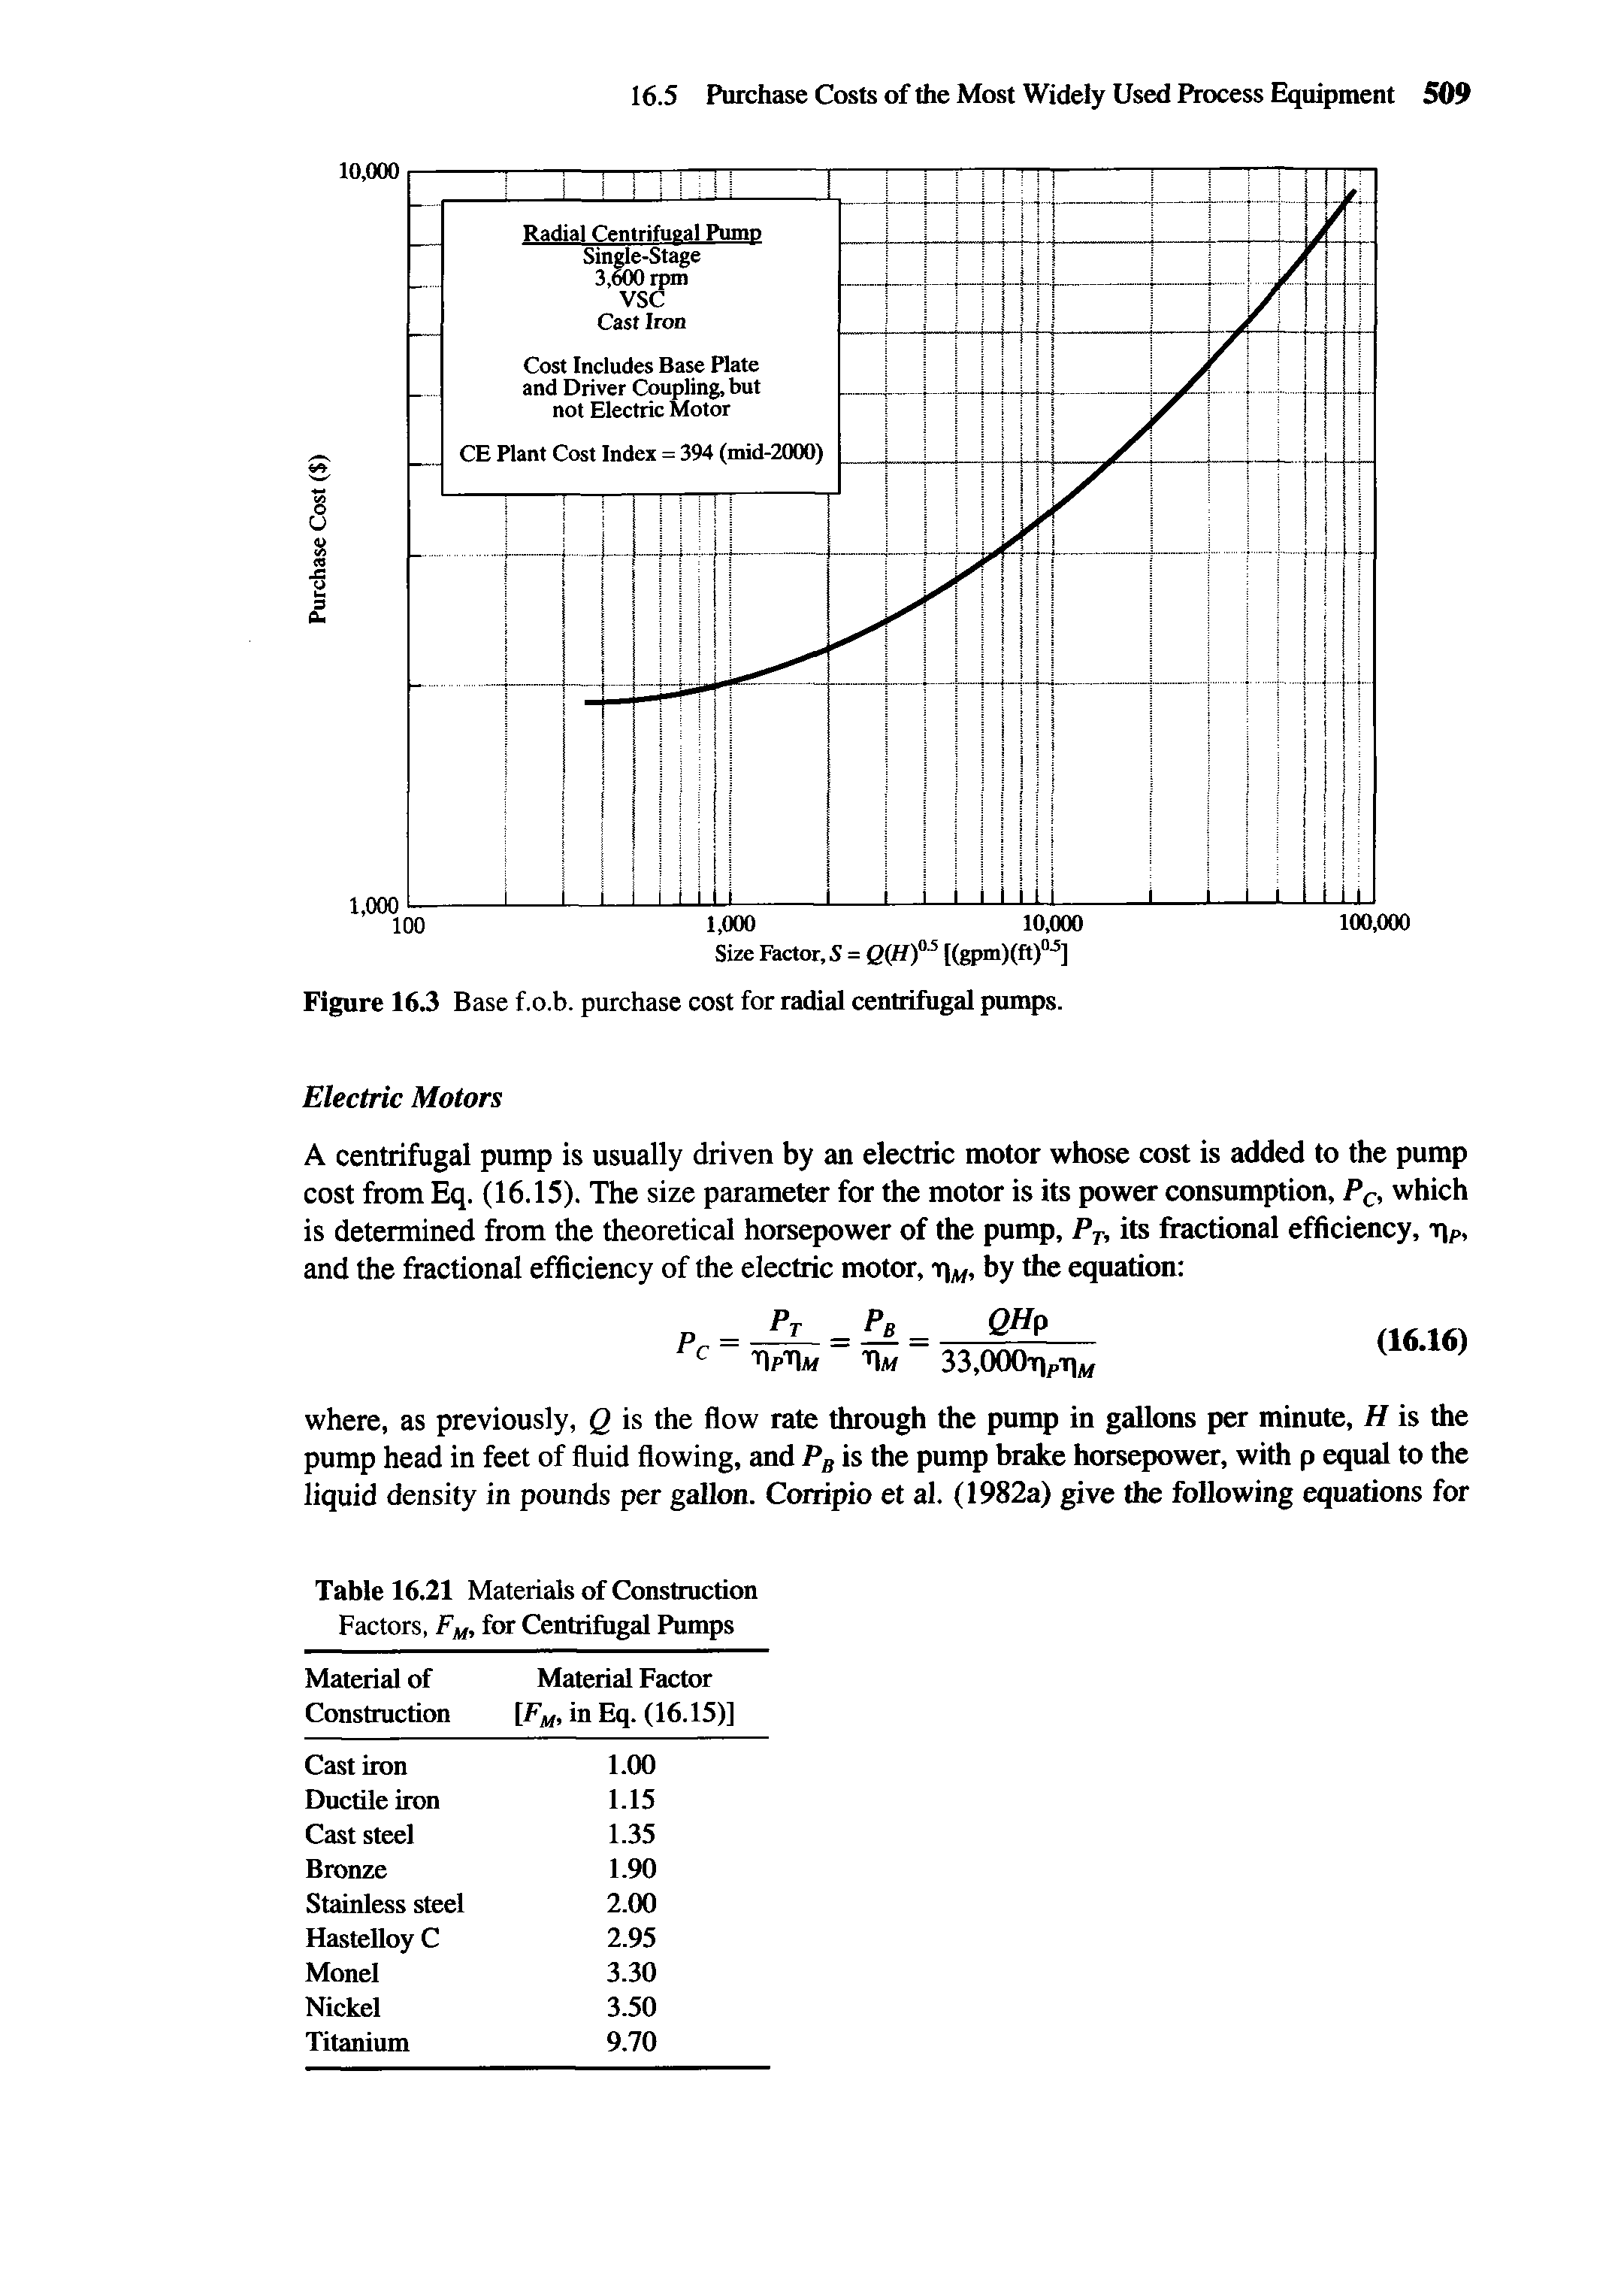 Figure 163 Base f.o.b. purchase cost for radial centrifugal pumps.